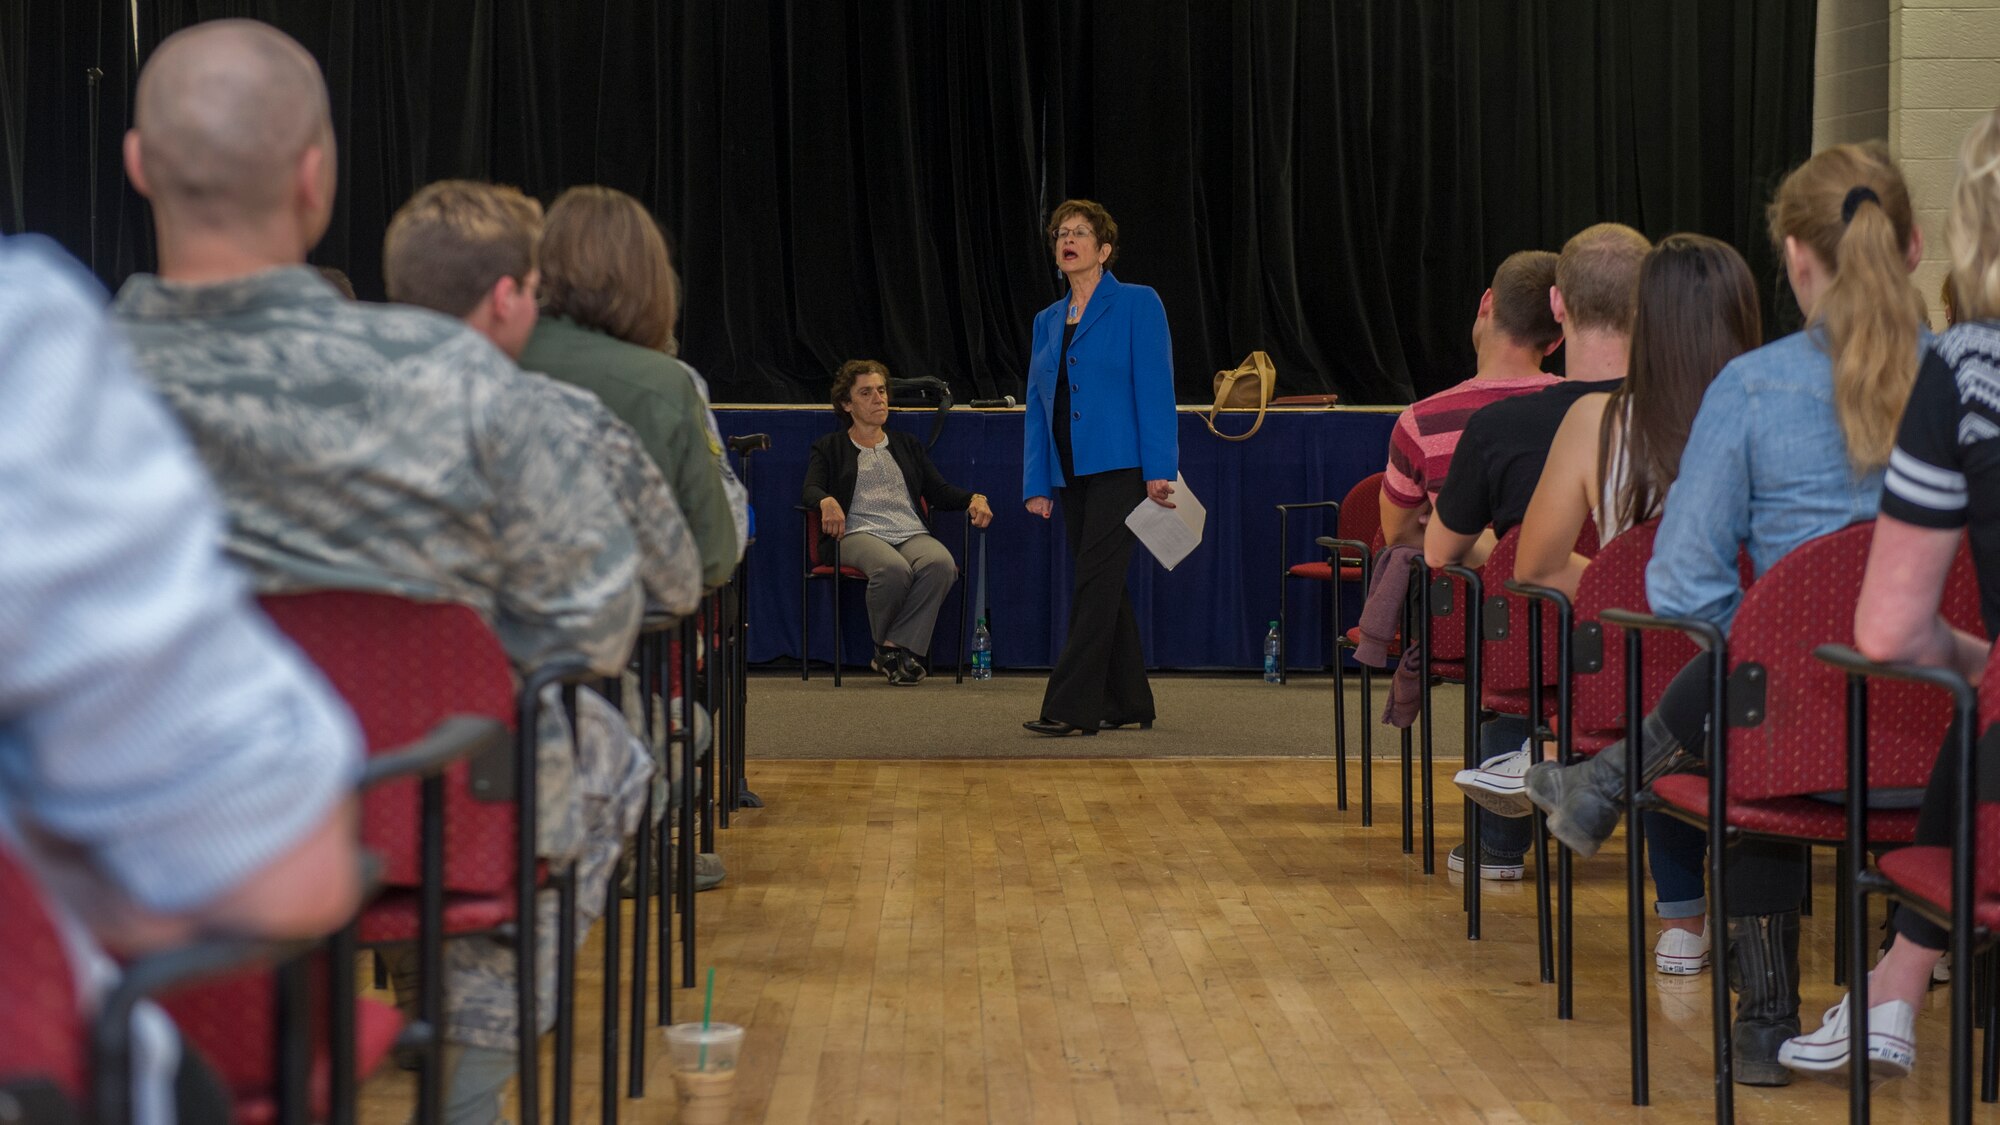 Dr. Gail Wallen, founder and director of the military Holocaust educational program, introduces herself and her guests during the Holocaust day of remembrance at Holloman Air Force Base, N.M., April 21, 2015. Wallen established the Holocaust military education program in 2002 due to the mandate that all U.S. military bases and ships at sea will host a Holocaust day of remembrance, to ensure future generations remember the sacrifices made during World War II. (U.S. Air Force photo by Airman 1st Class Aaron Montoya / Released)